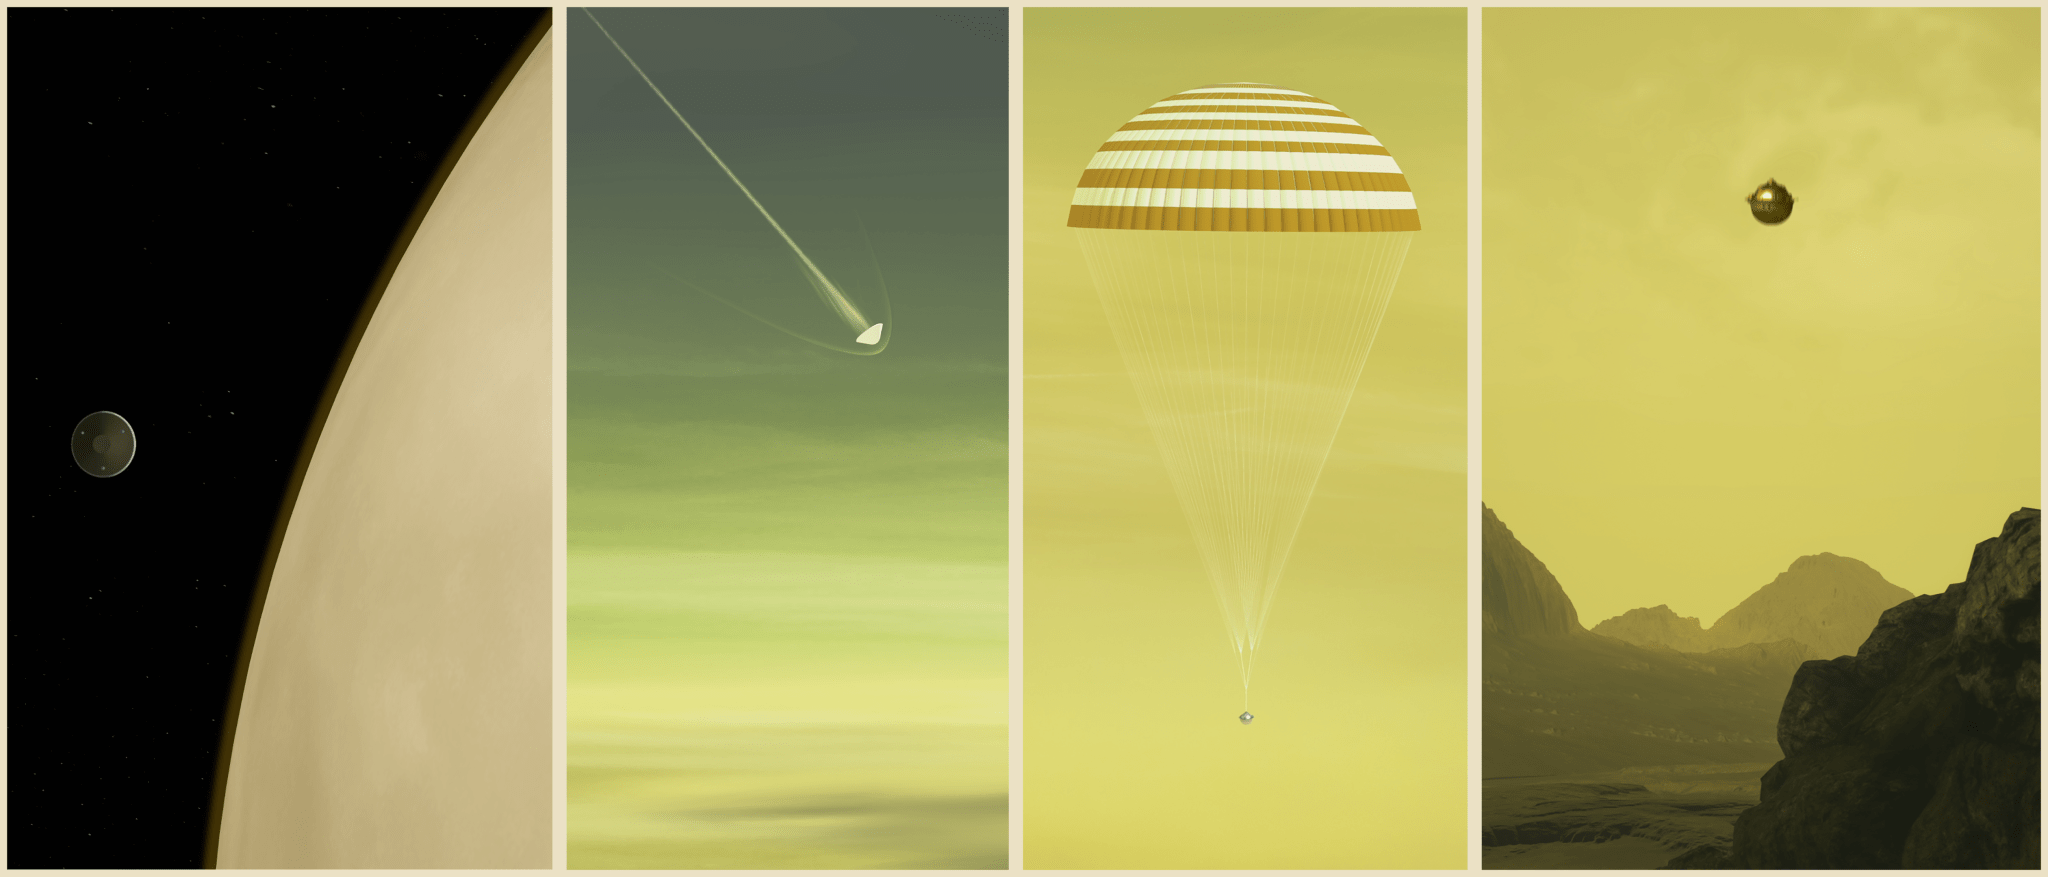 Four vertical visualizations, from left to right, the first is the DANIVCI+ spacecraft as a small sphere next to a large Venus, the second is the spacecraft entering Venus' atmosphere, third is the orange and white striped parachute, and the fourth is DAVINCI+ on Venus 